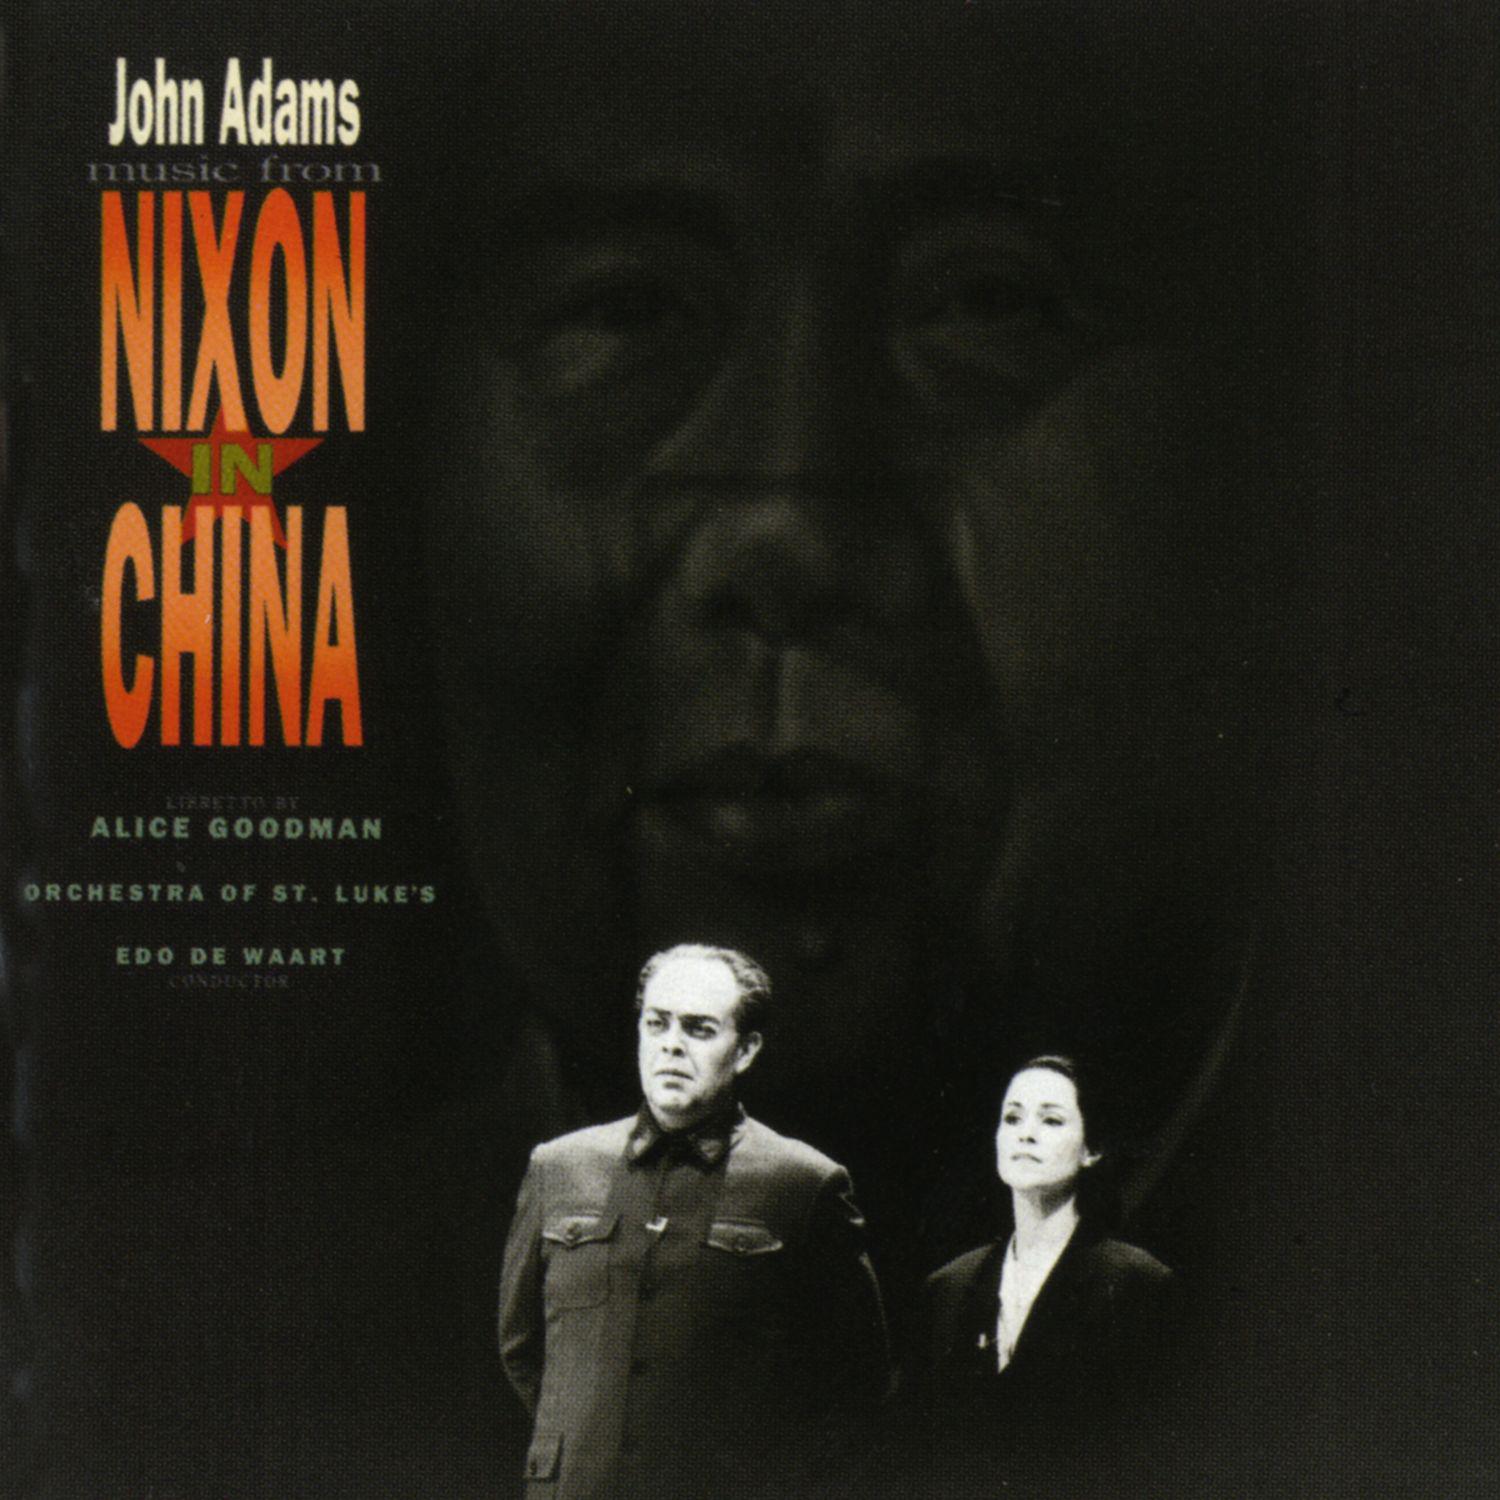 Nixon in China, Act II, Scene 1:"At Last the Weather's Warming up"